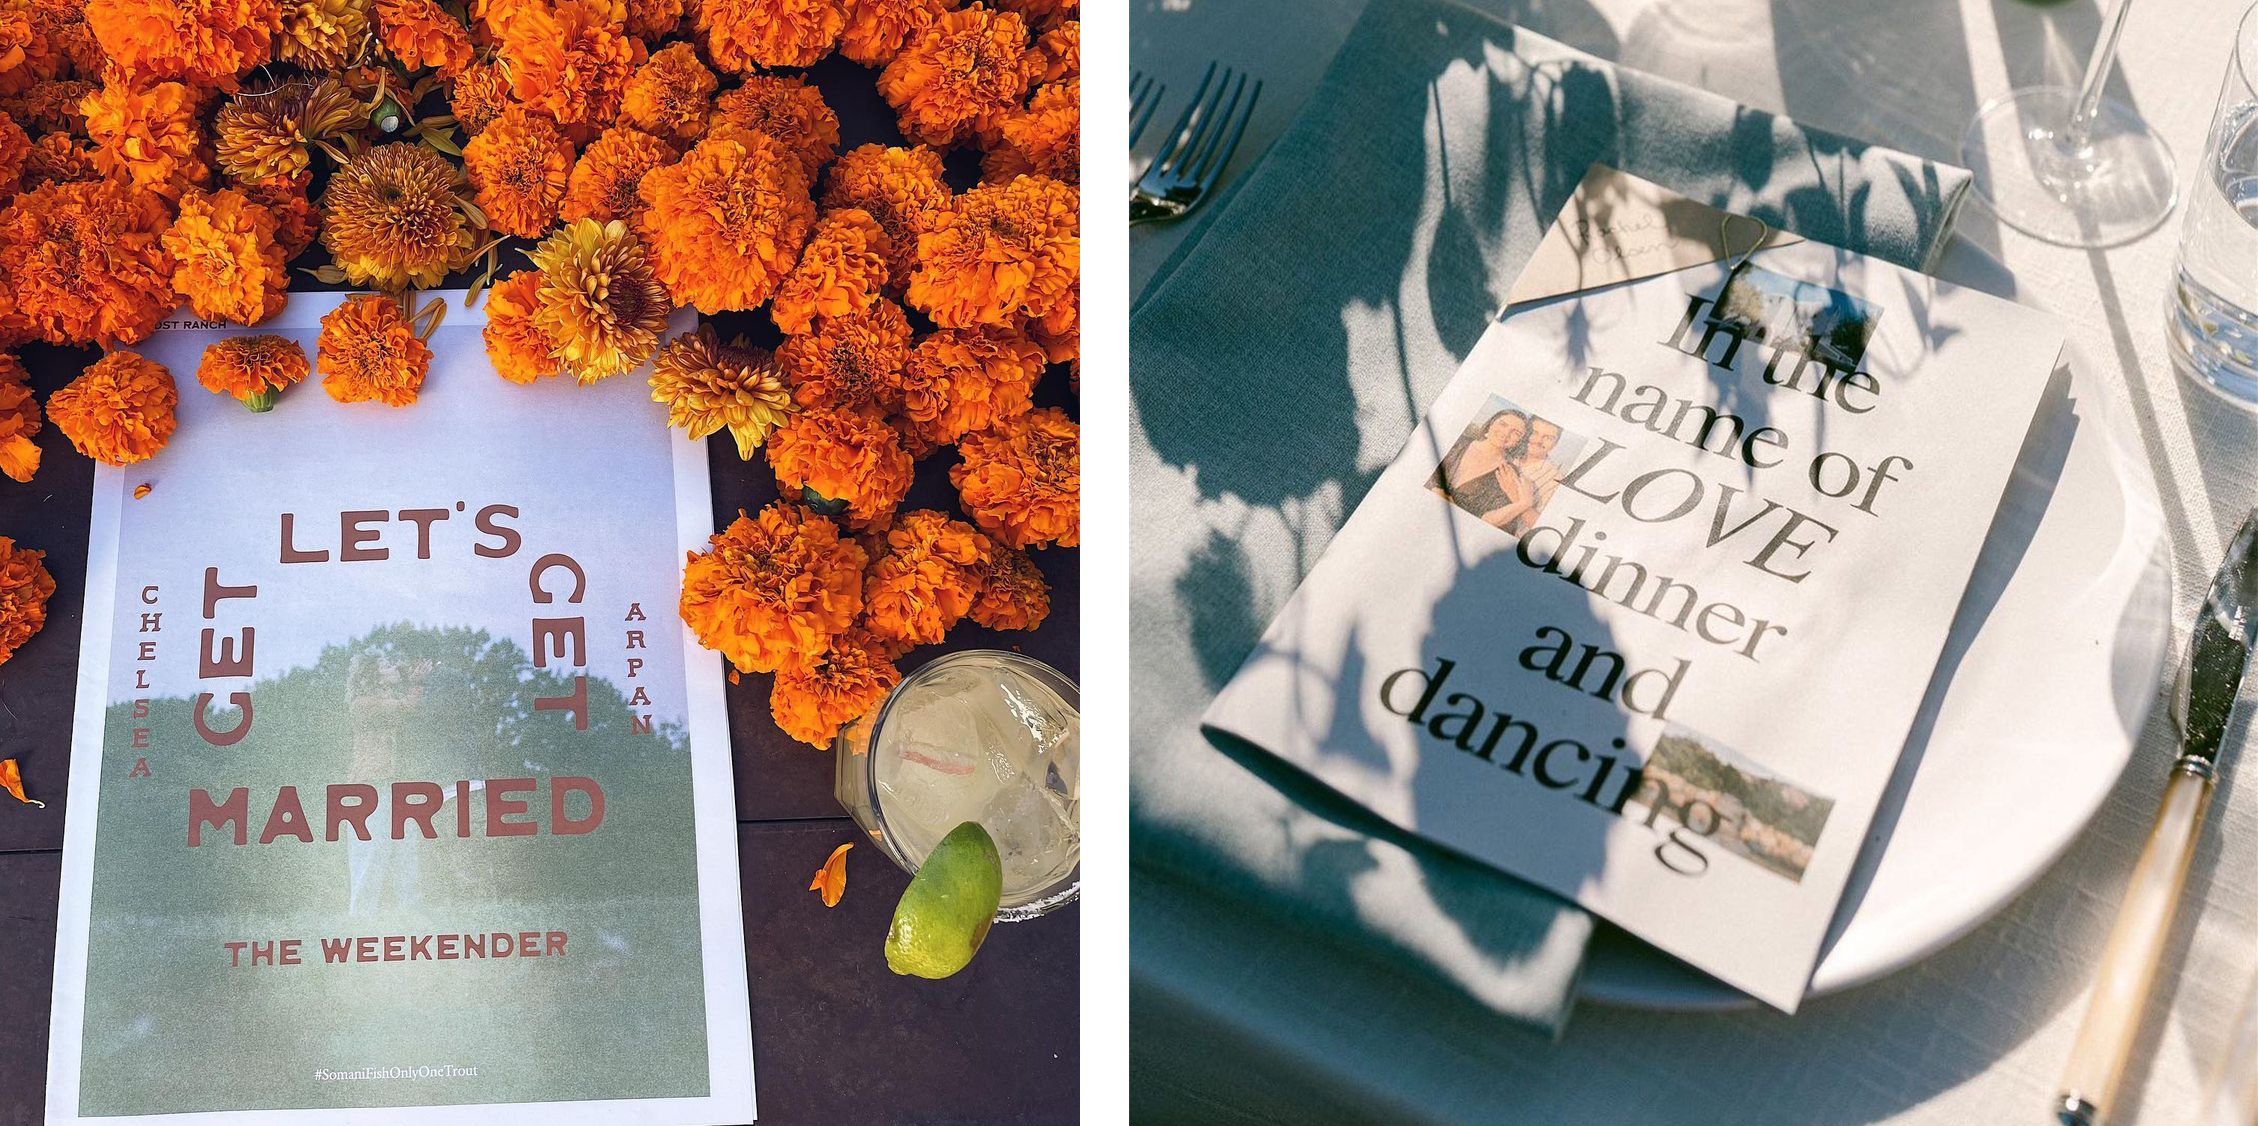 Everything you need to know to print a wedding newspaper with Newspaper Club